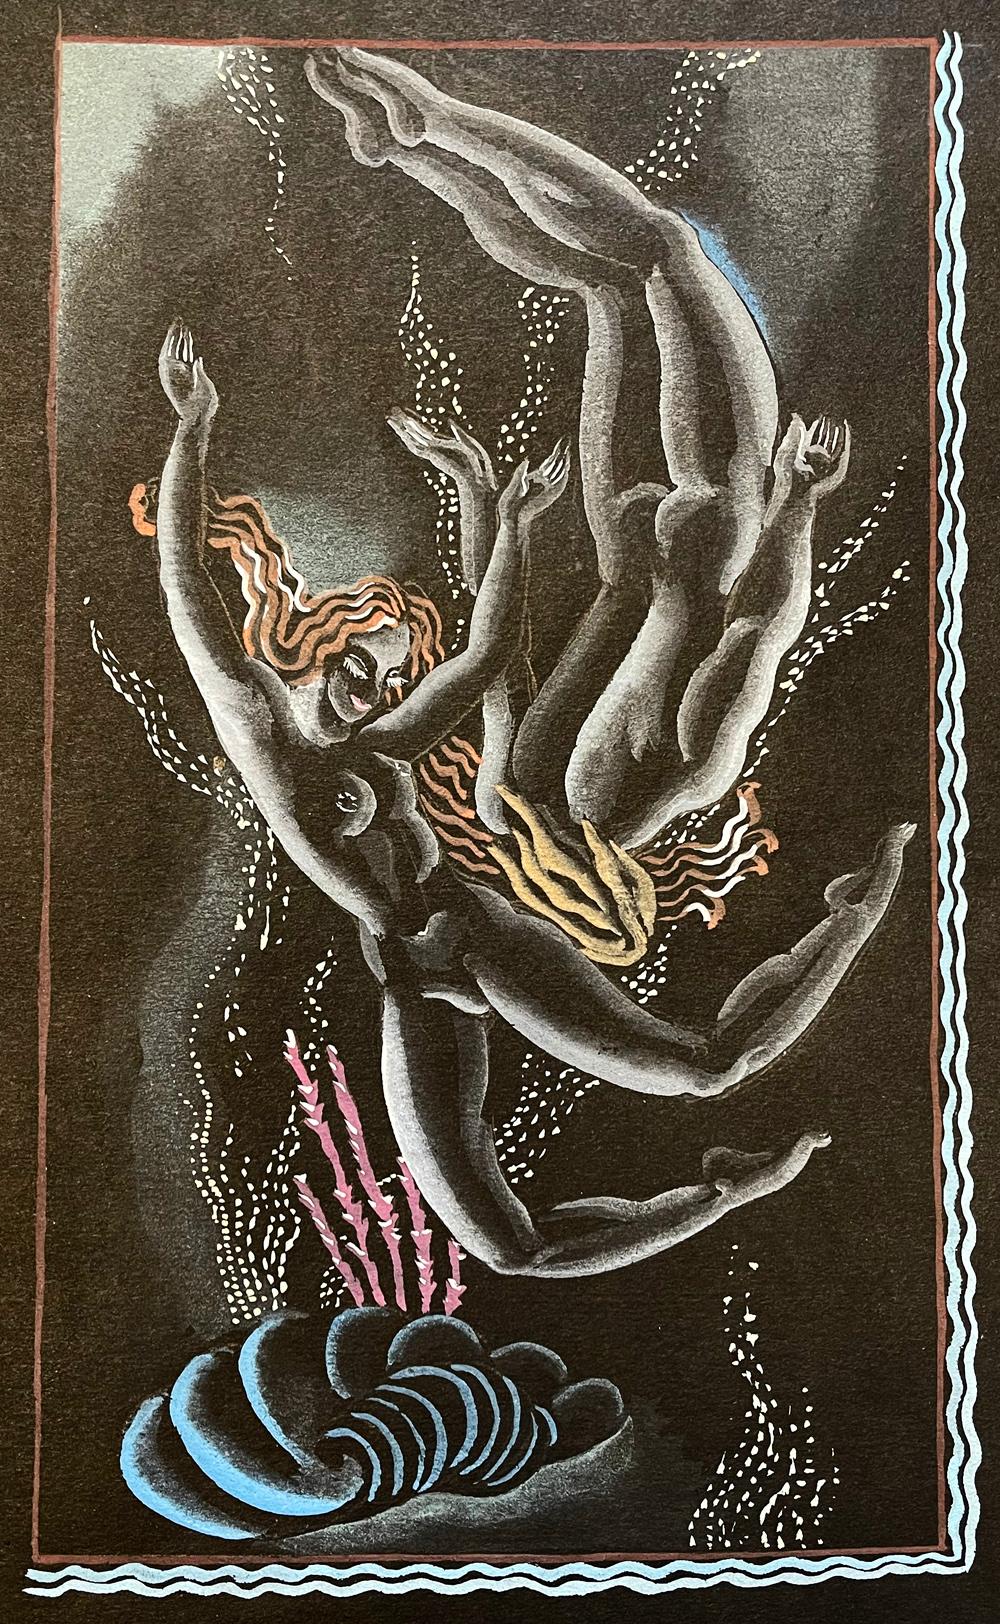 Highly sophisticated and striking in conception and execution, this study for an Art Deco bathroom mural depicts -- appropriately -- male and female nude figures swimming in an underwater scene with coral, a large clam shell and seaweed in one